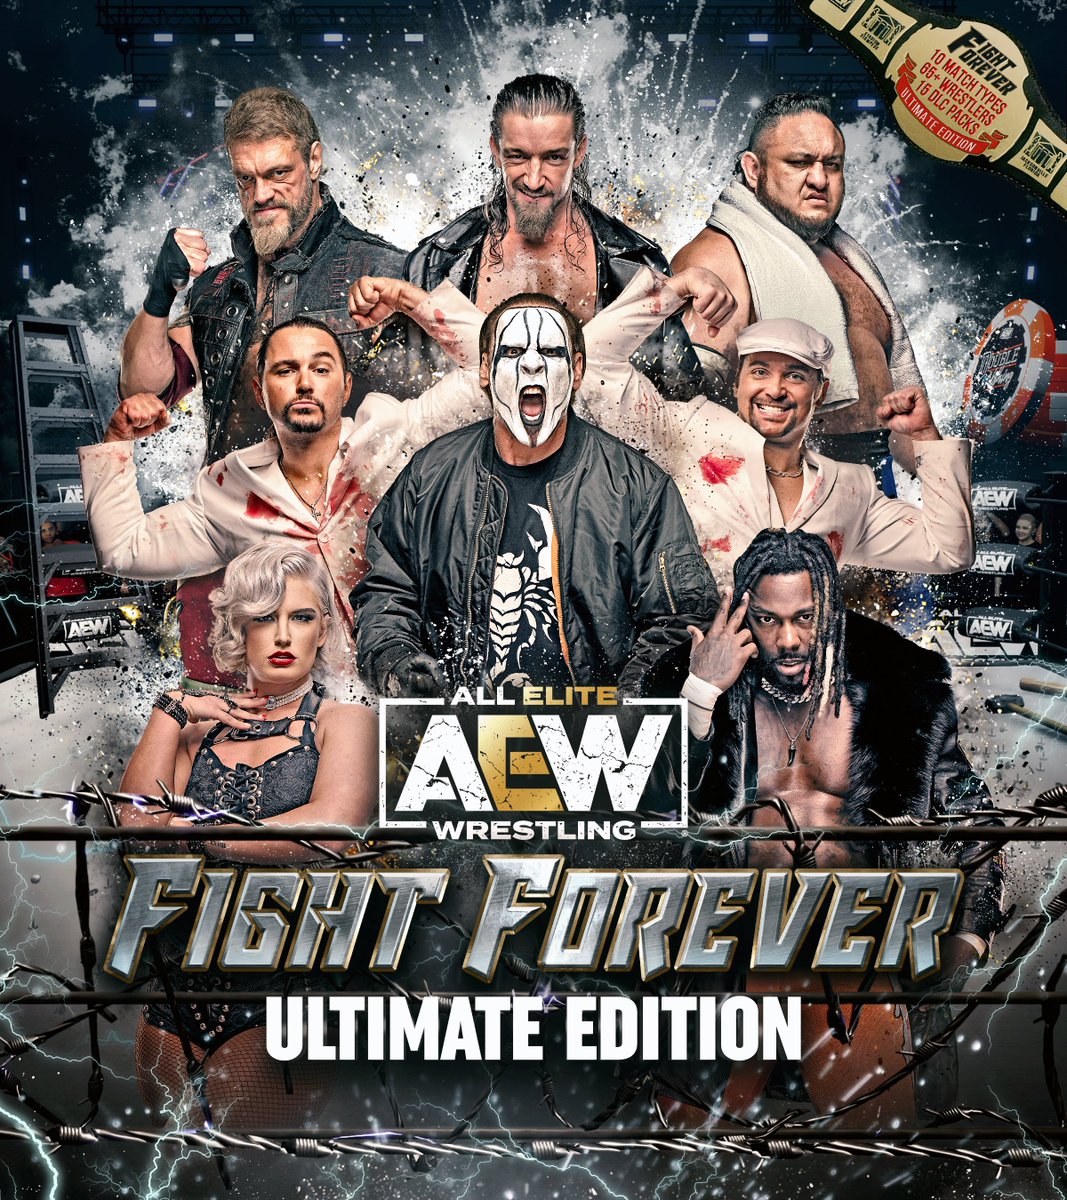 Still waiting to grab your copy of #AEWFightForever? Grab The ULTIMATE EDITION! The Ultimate Edition includes the base game, plus all 4 seasons of DLC! That's 10 Match Types, 65+ wrestlers & 15 DLC packs all for $99.99! Available for purchase digitally on console & PC today!